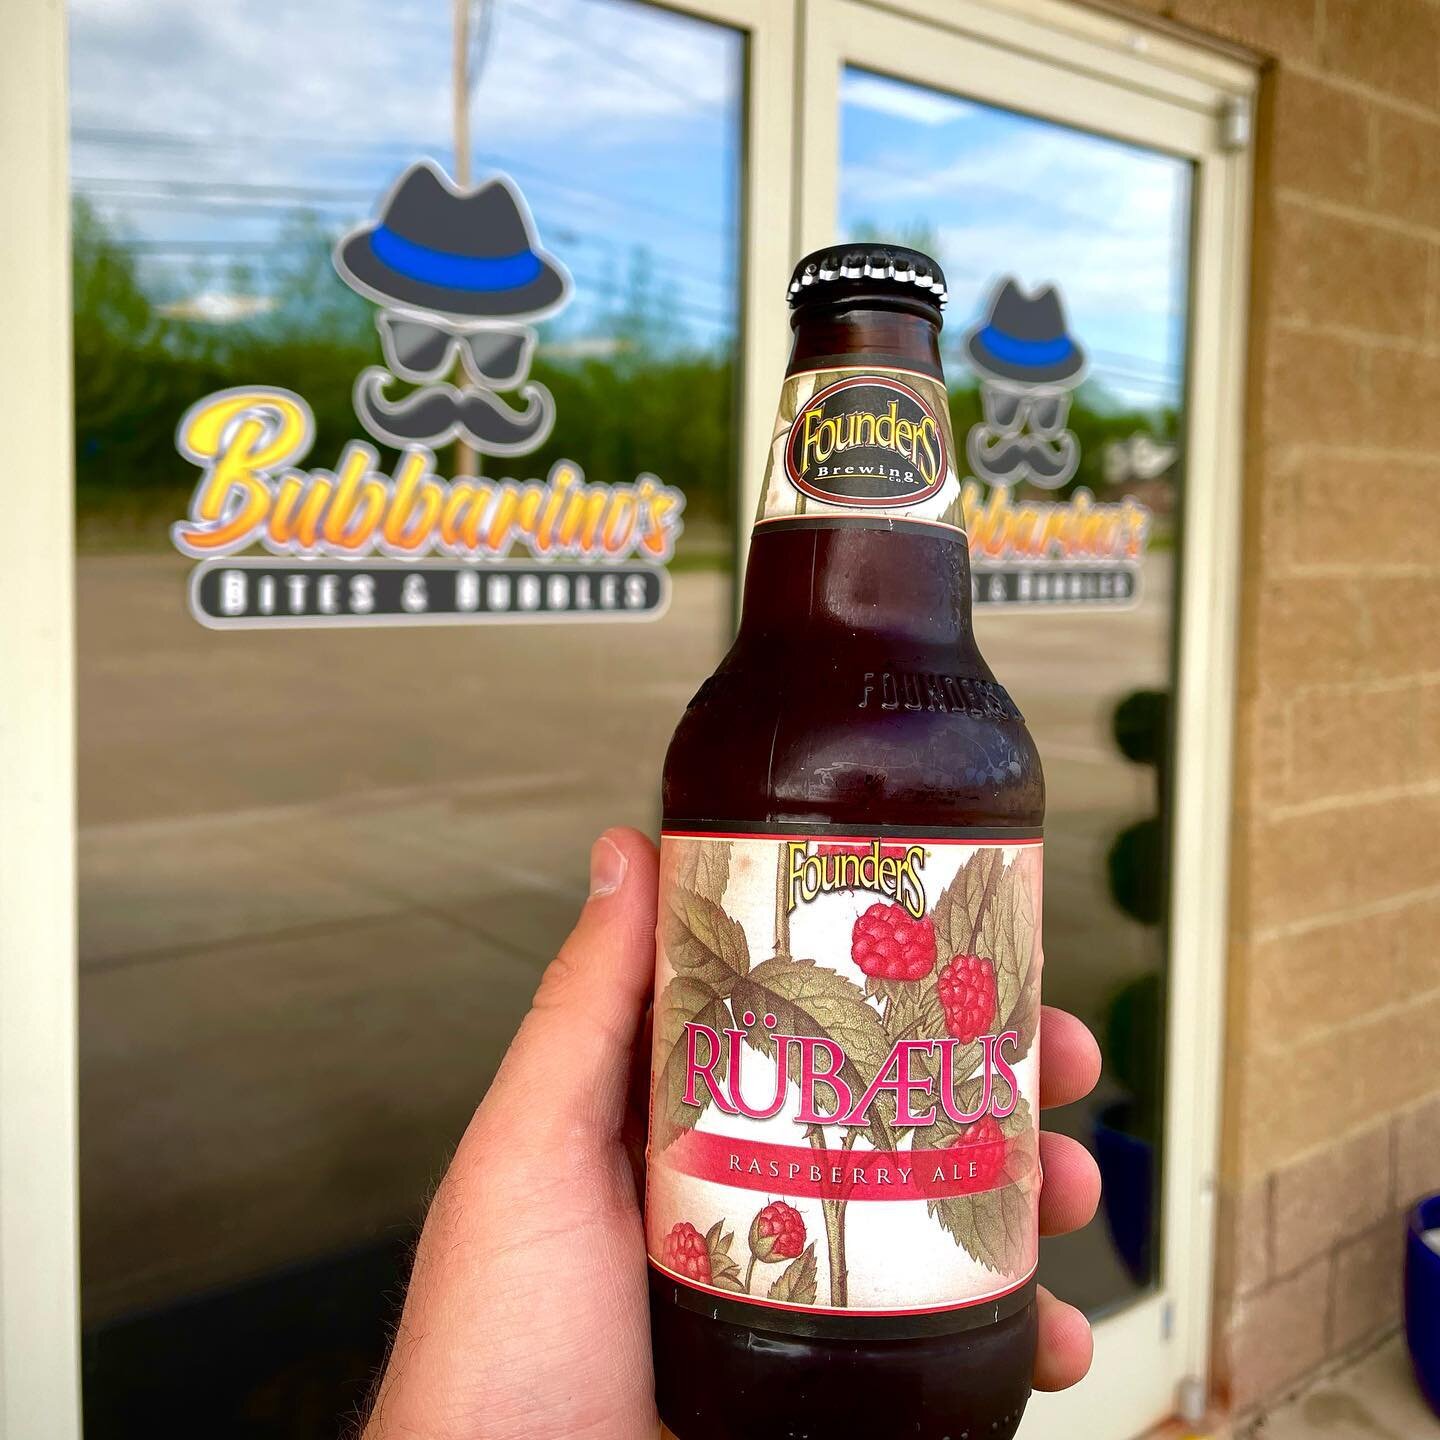 $2 BEER TODAY! RUBAEUS AND HERD COUNTRY LAGER! 😎

📍 3501 Teays Valley Road, Hurricane 
💻 Order online - bubbarinos.com 
📞 Call now - 304.397.6037